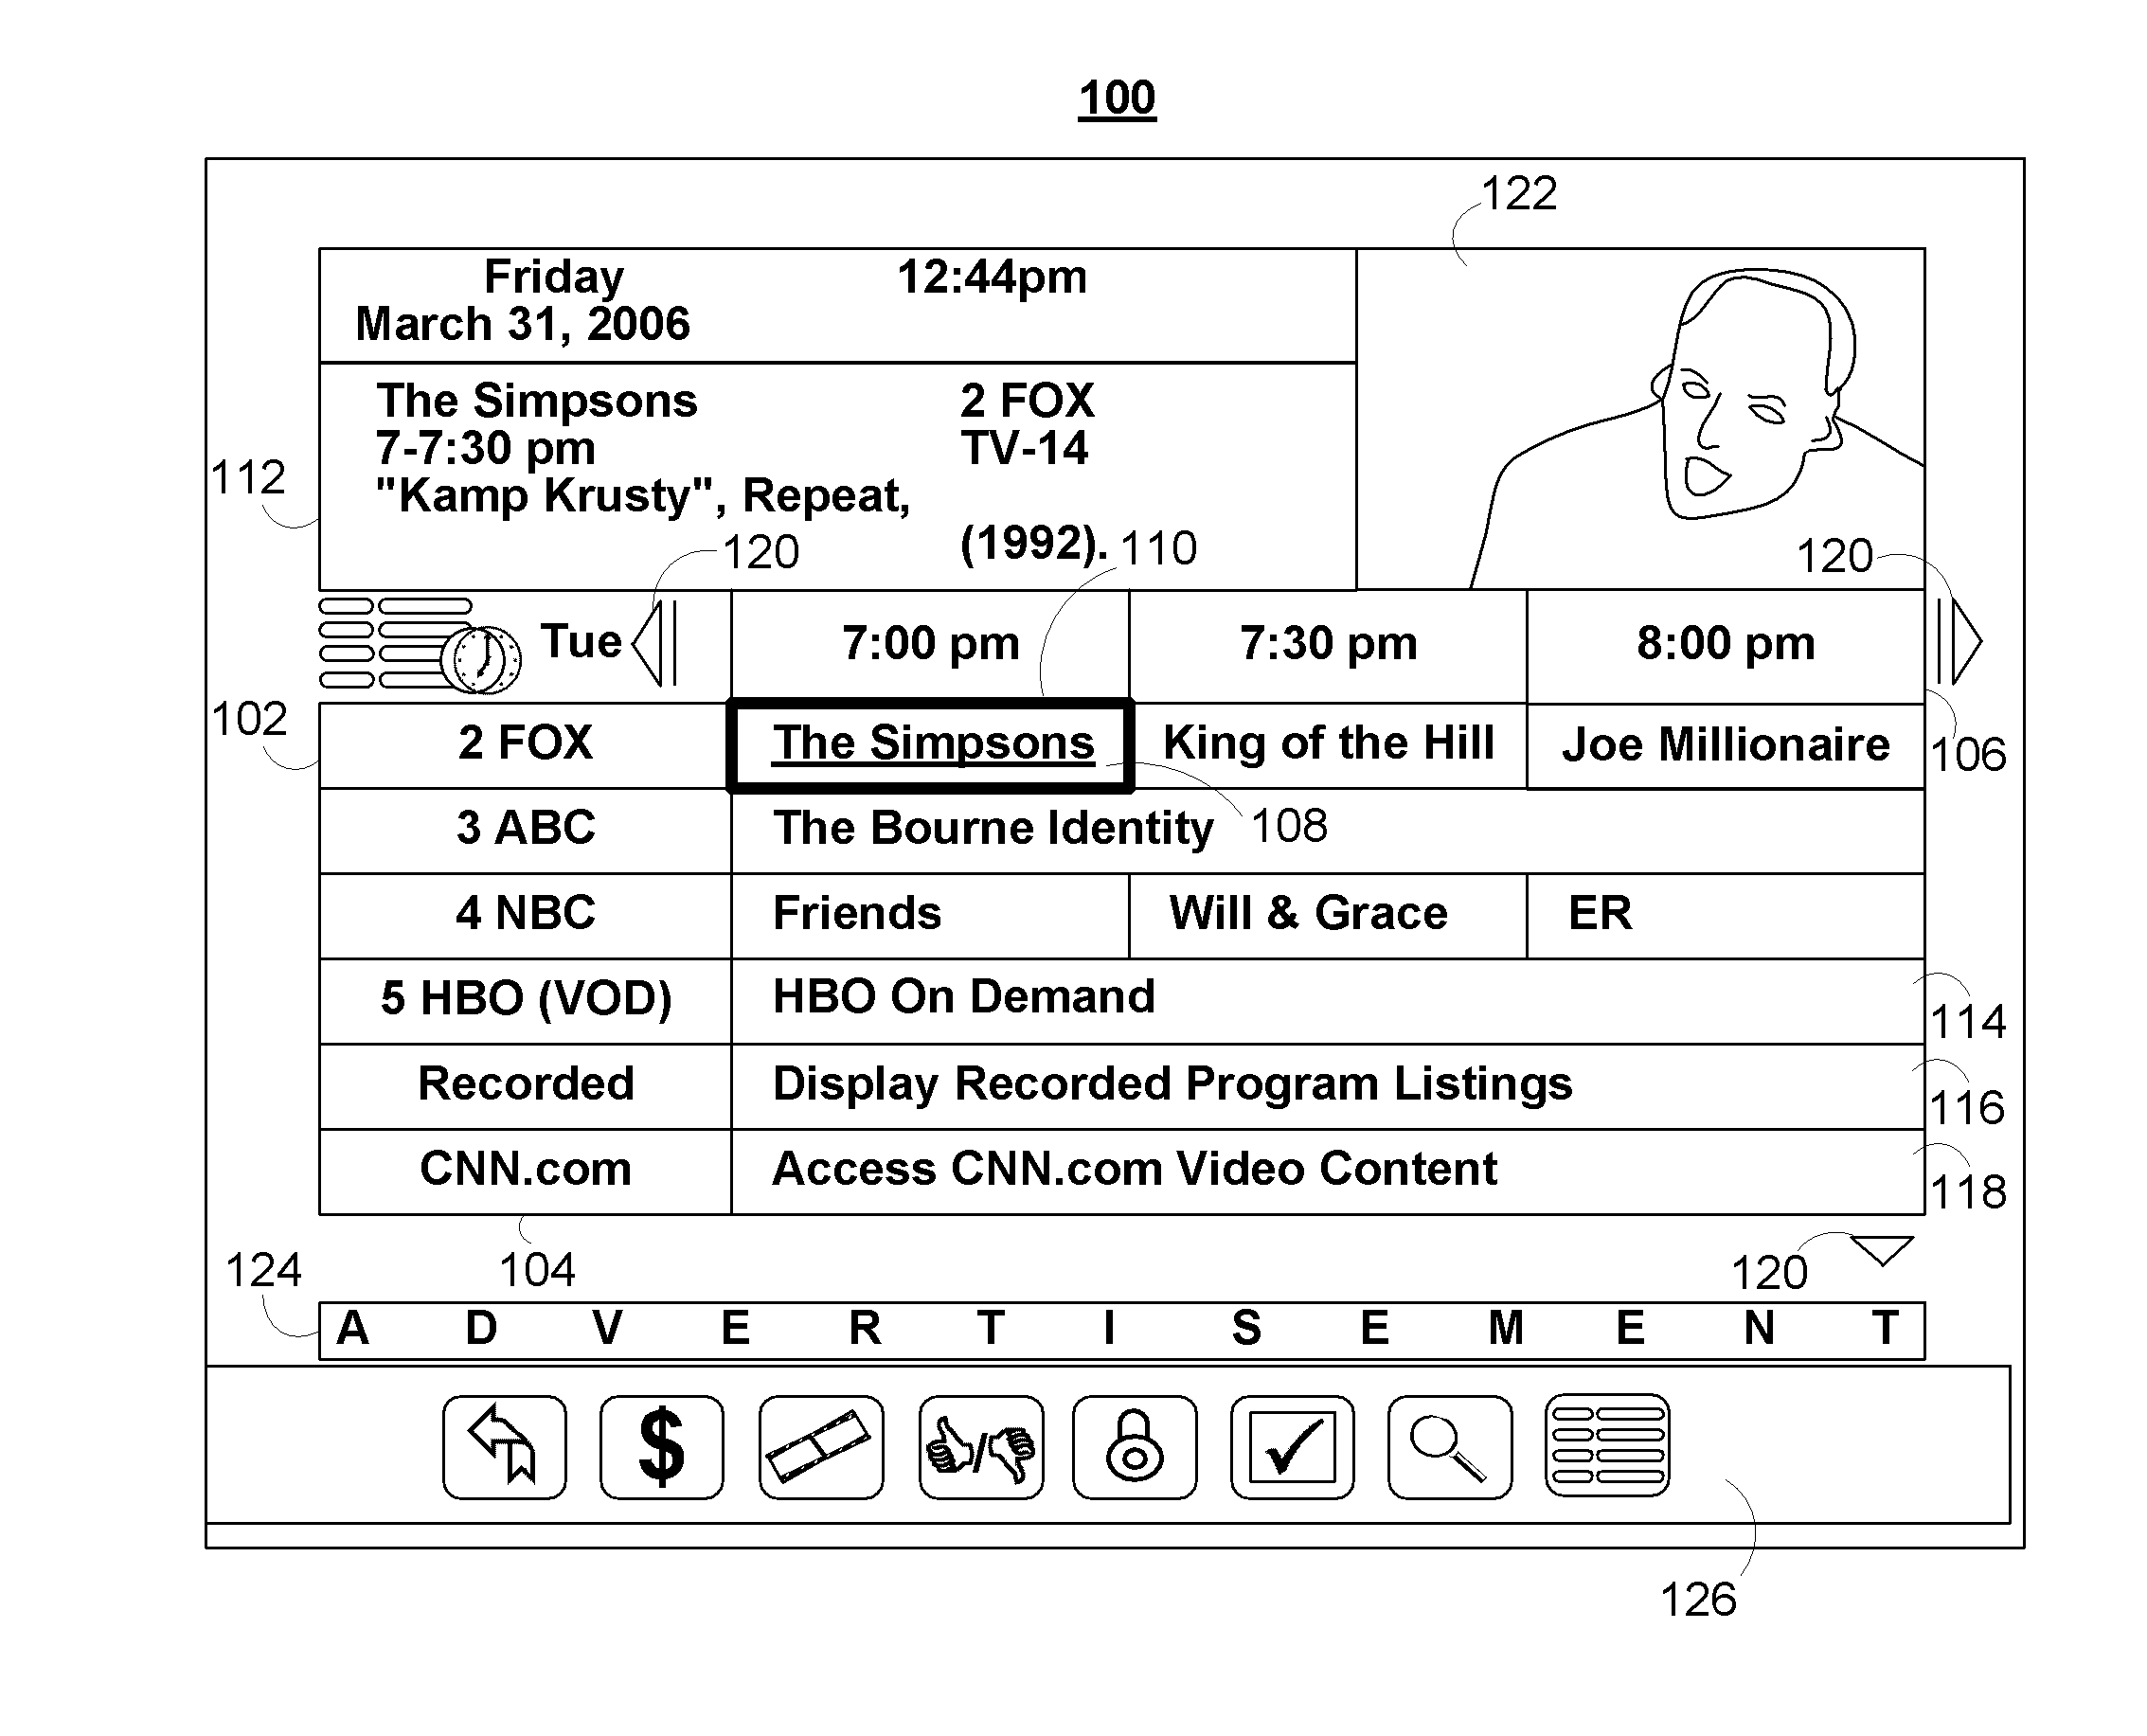 Systems and methods for providing interactive content with a media asset on a media equipment device